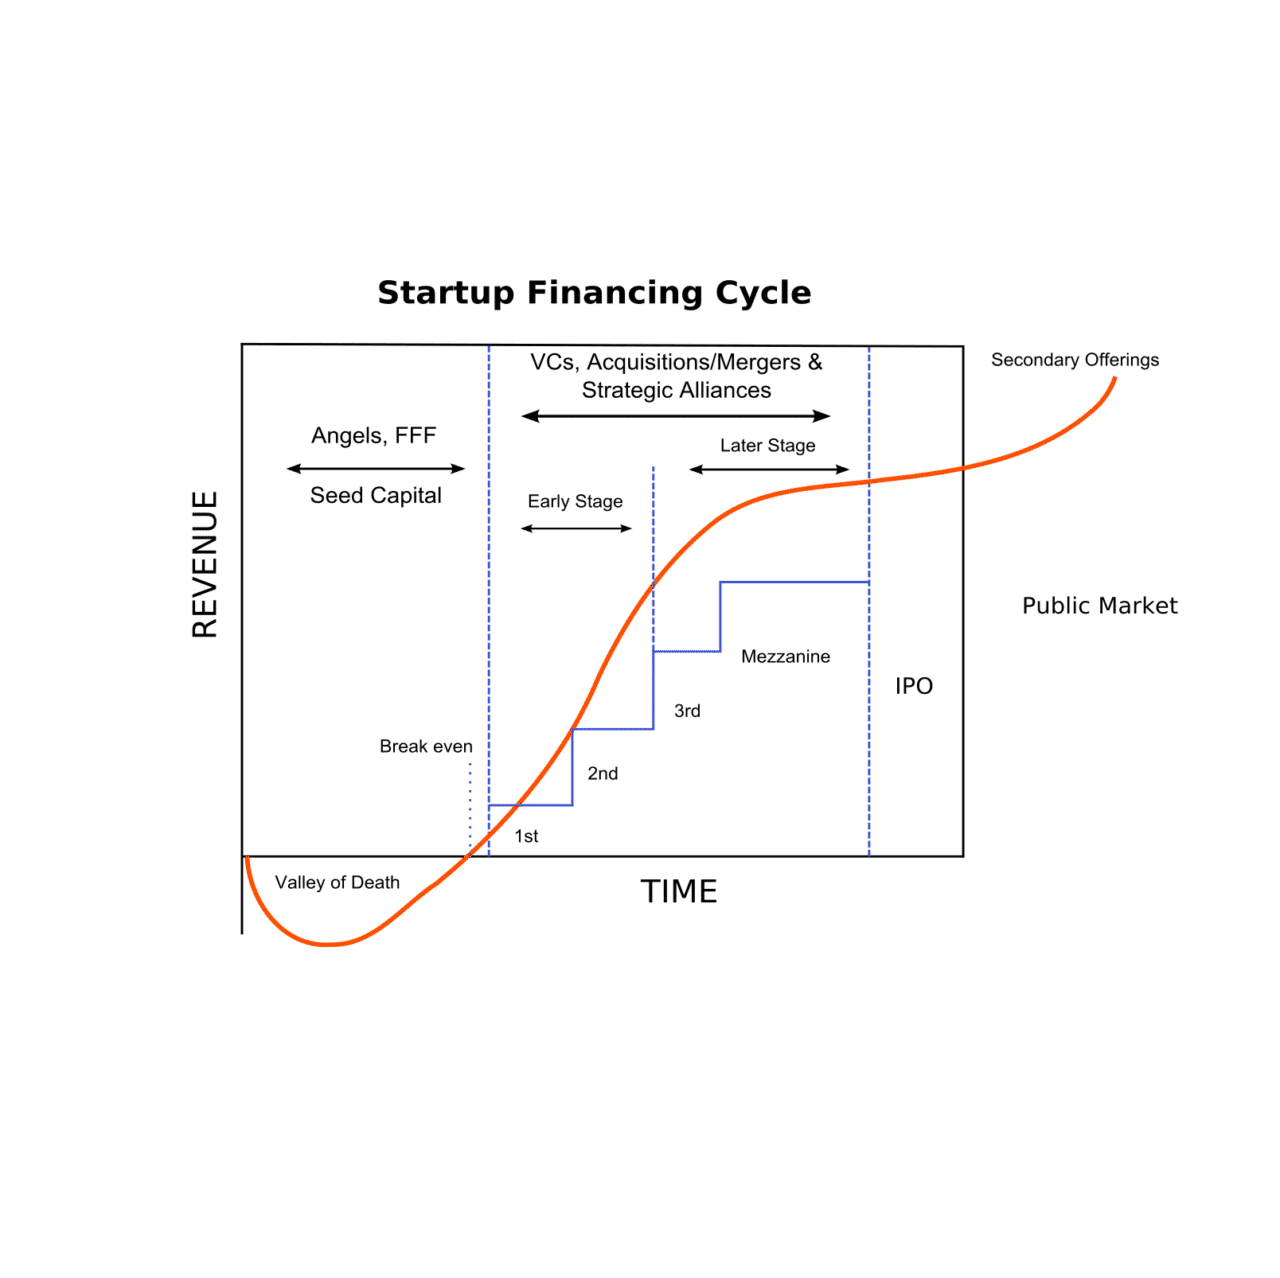 A visual representation of the startup financing cycle, illustrating the various stages and processes involved in funding a new business.